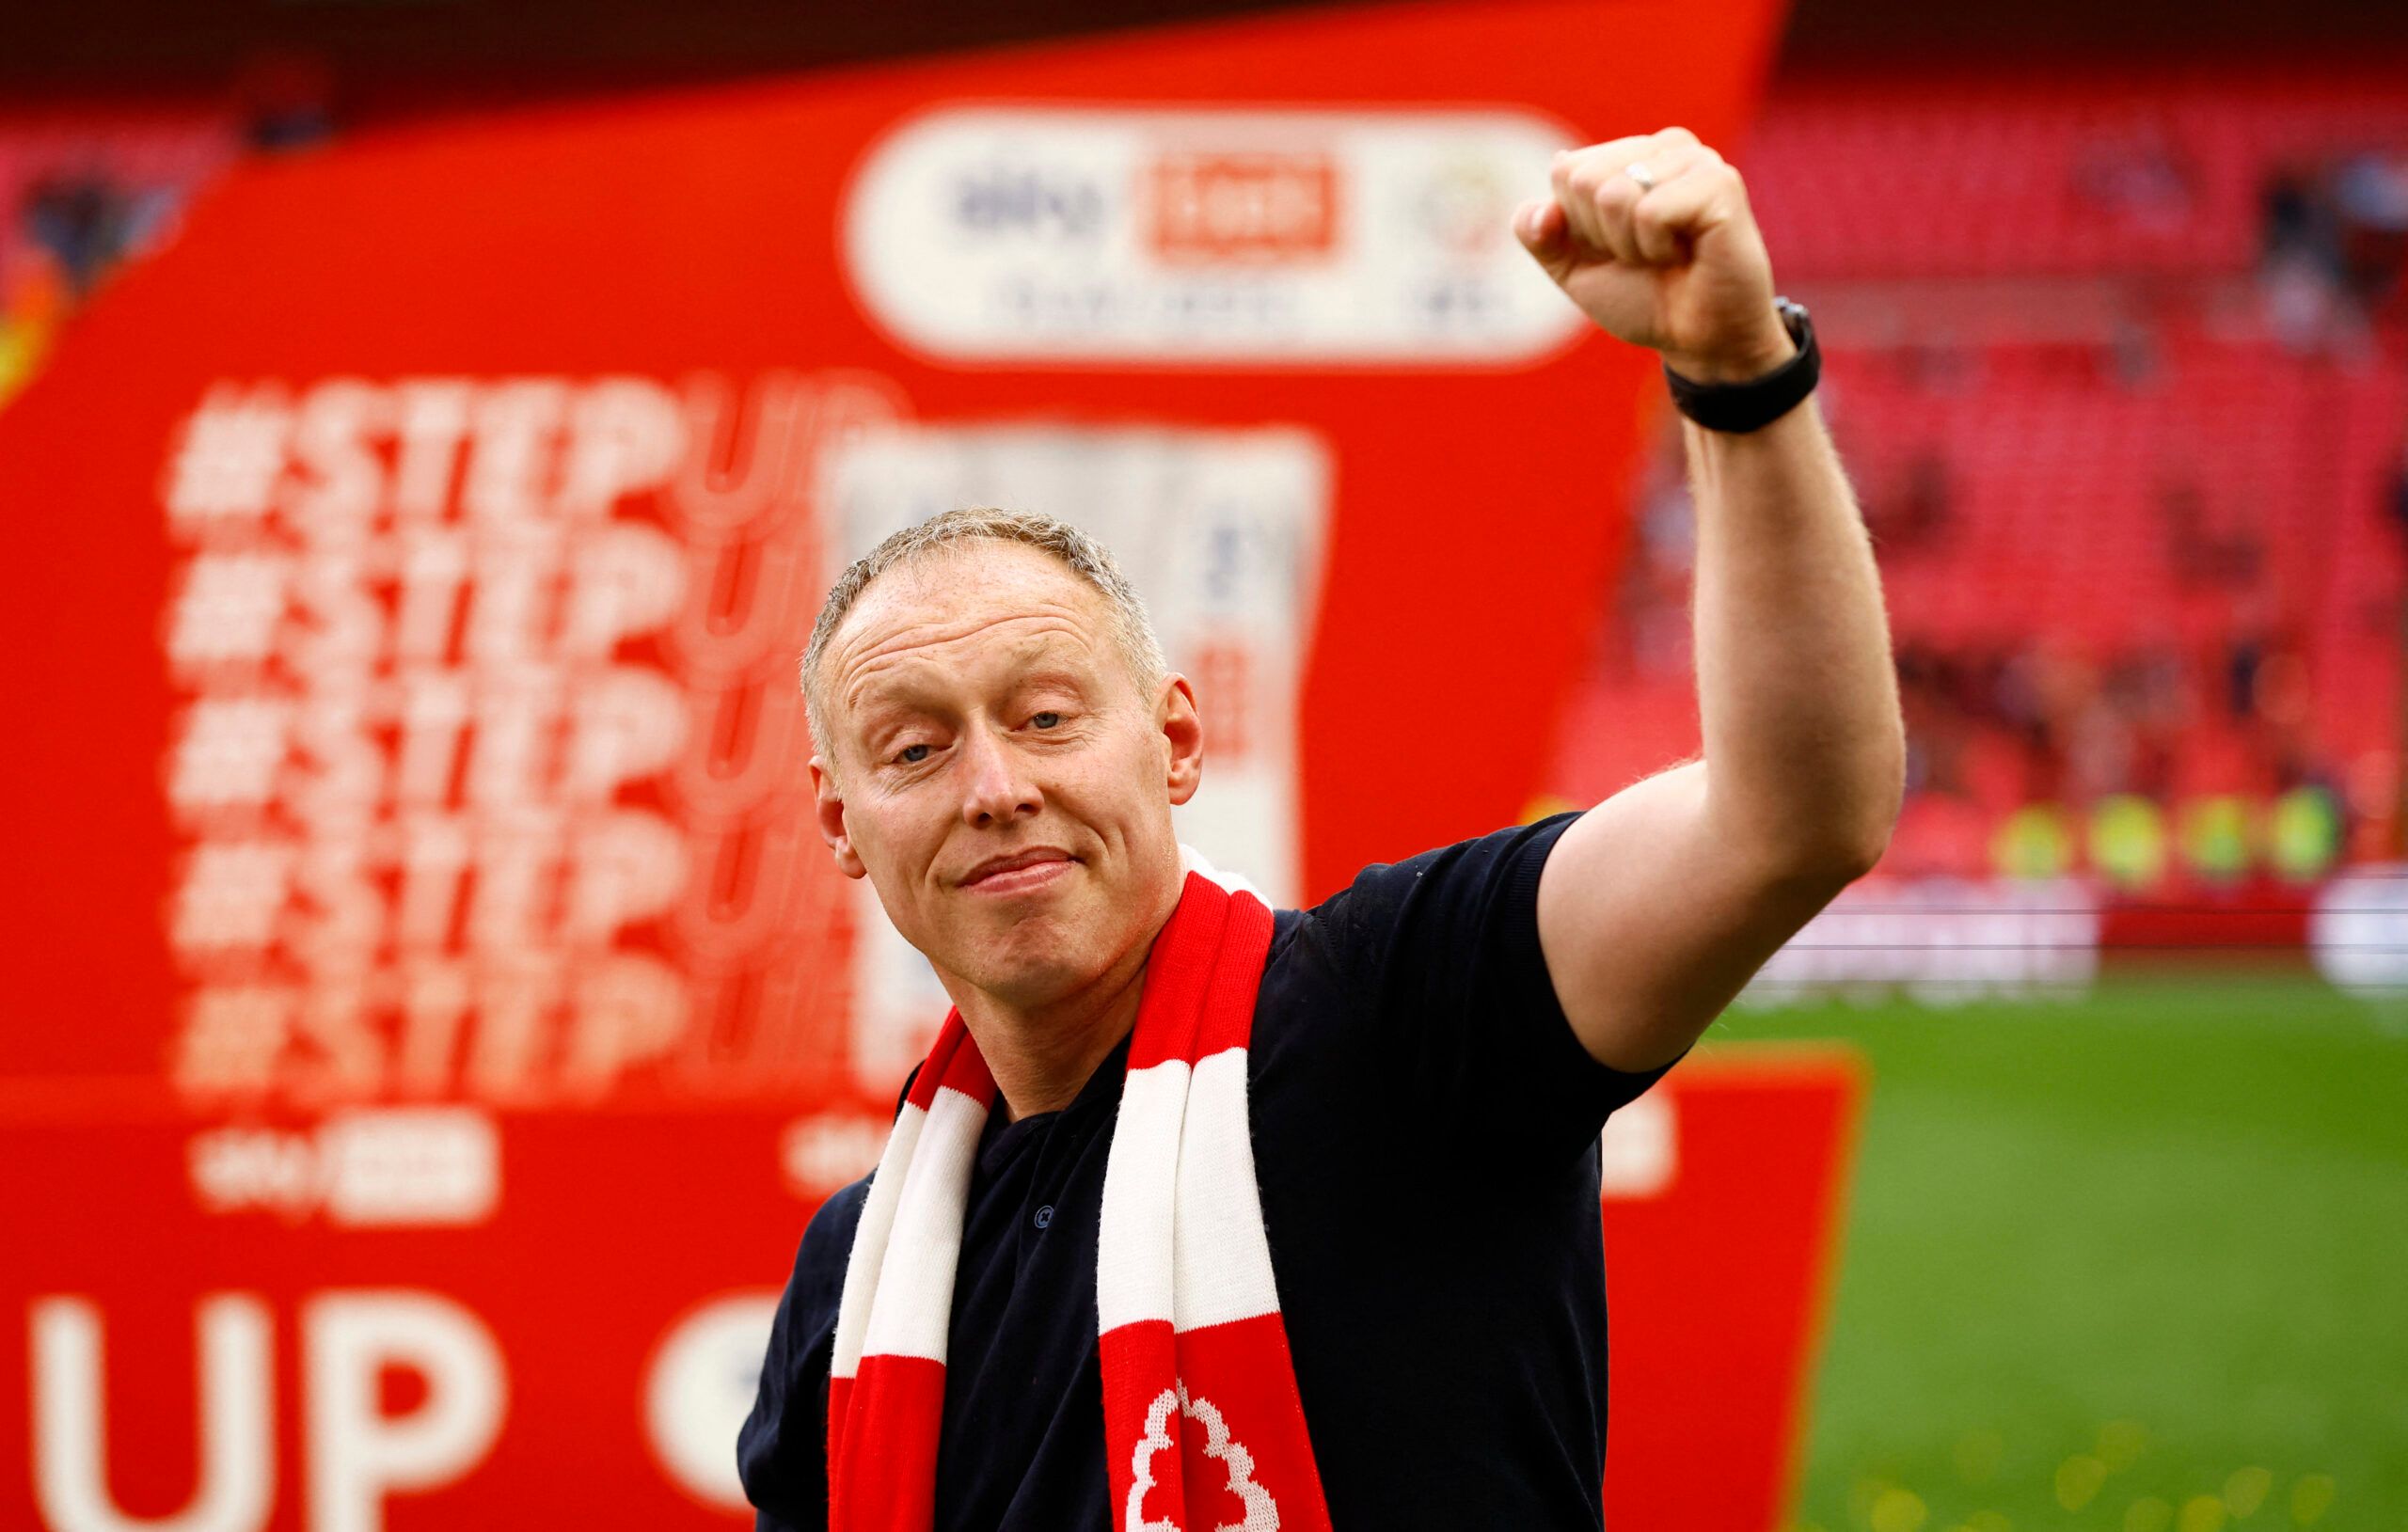 Soccer Football - Championship Play-Off Final - Huddersfield Town v Nottingham Forest - Wembley Stadium, London, Britain - May 29, 2022 Nottingham Forest manager Steve Cooper celebrates after winning the Championship Play-Off Final Action Images via Reuters/Andrew Boyers